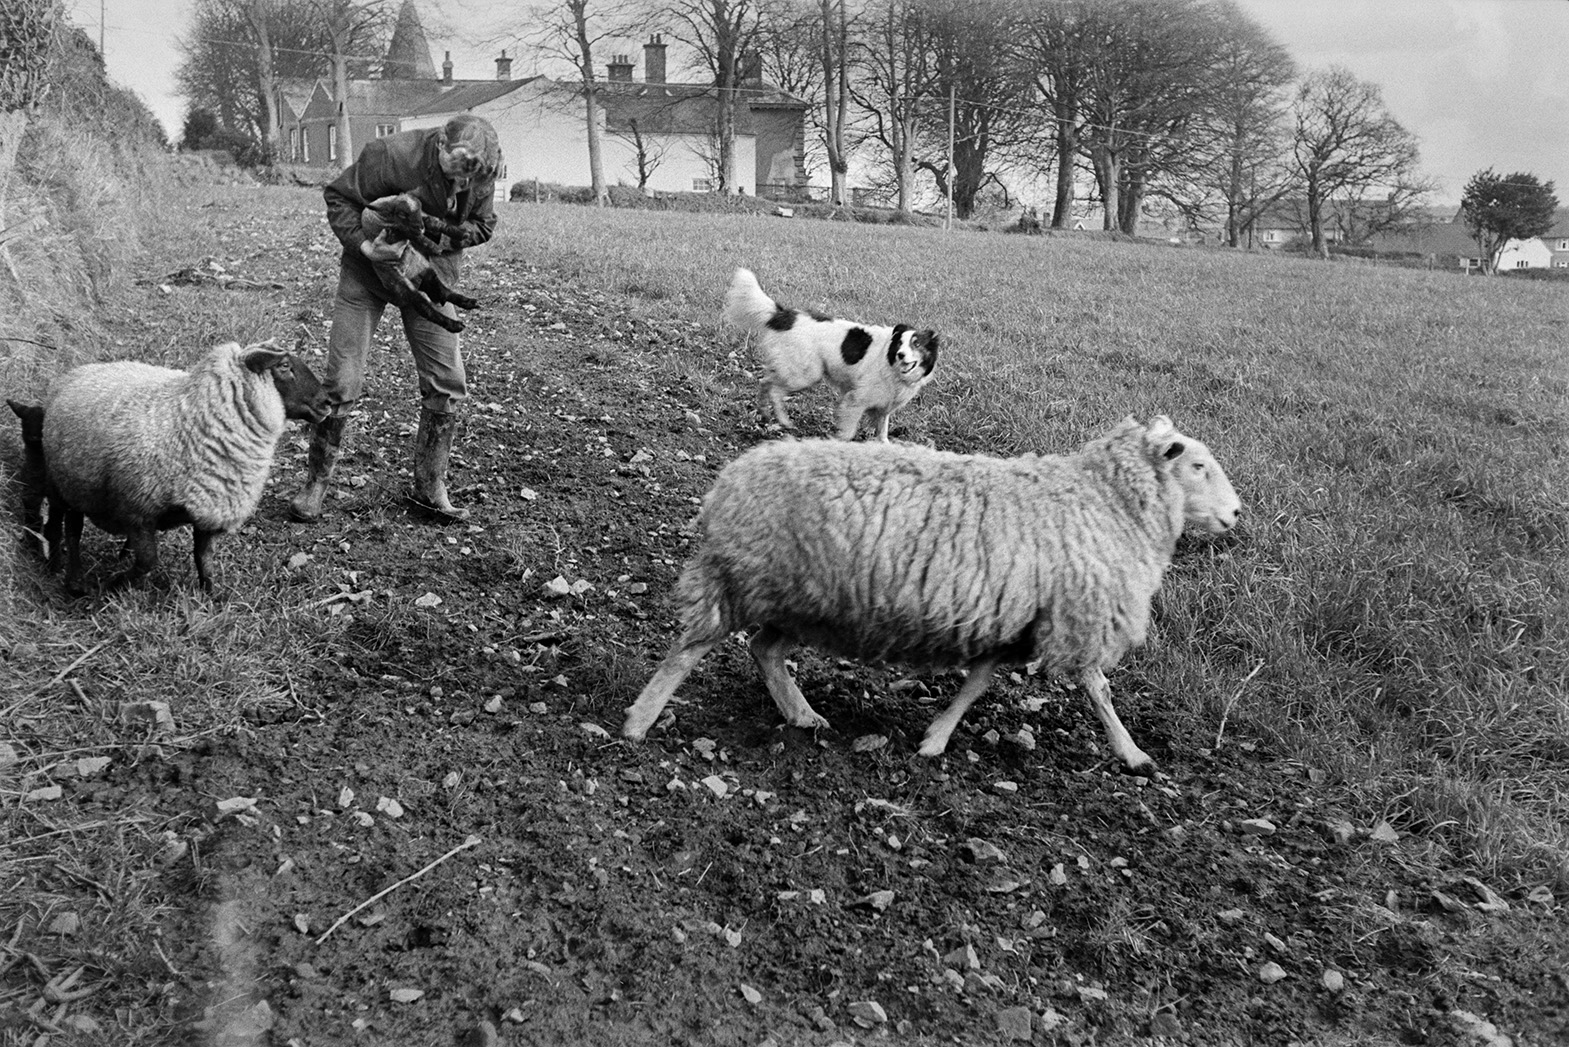 Ivor Bourne catching lambs to tag their ears in a field at Mill Road Farm, Beaford. The ewes are with the lambs and a dog is with him. Trees and farm buildings can be seen in the background. The farm was also known as Jeffrys.